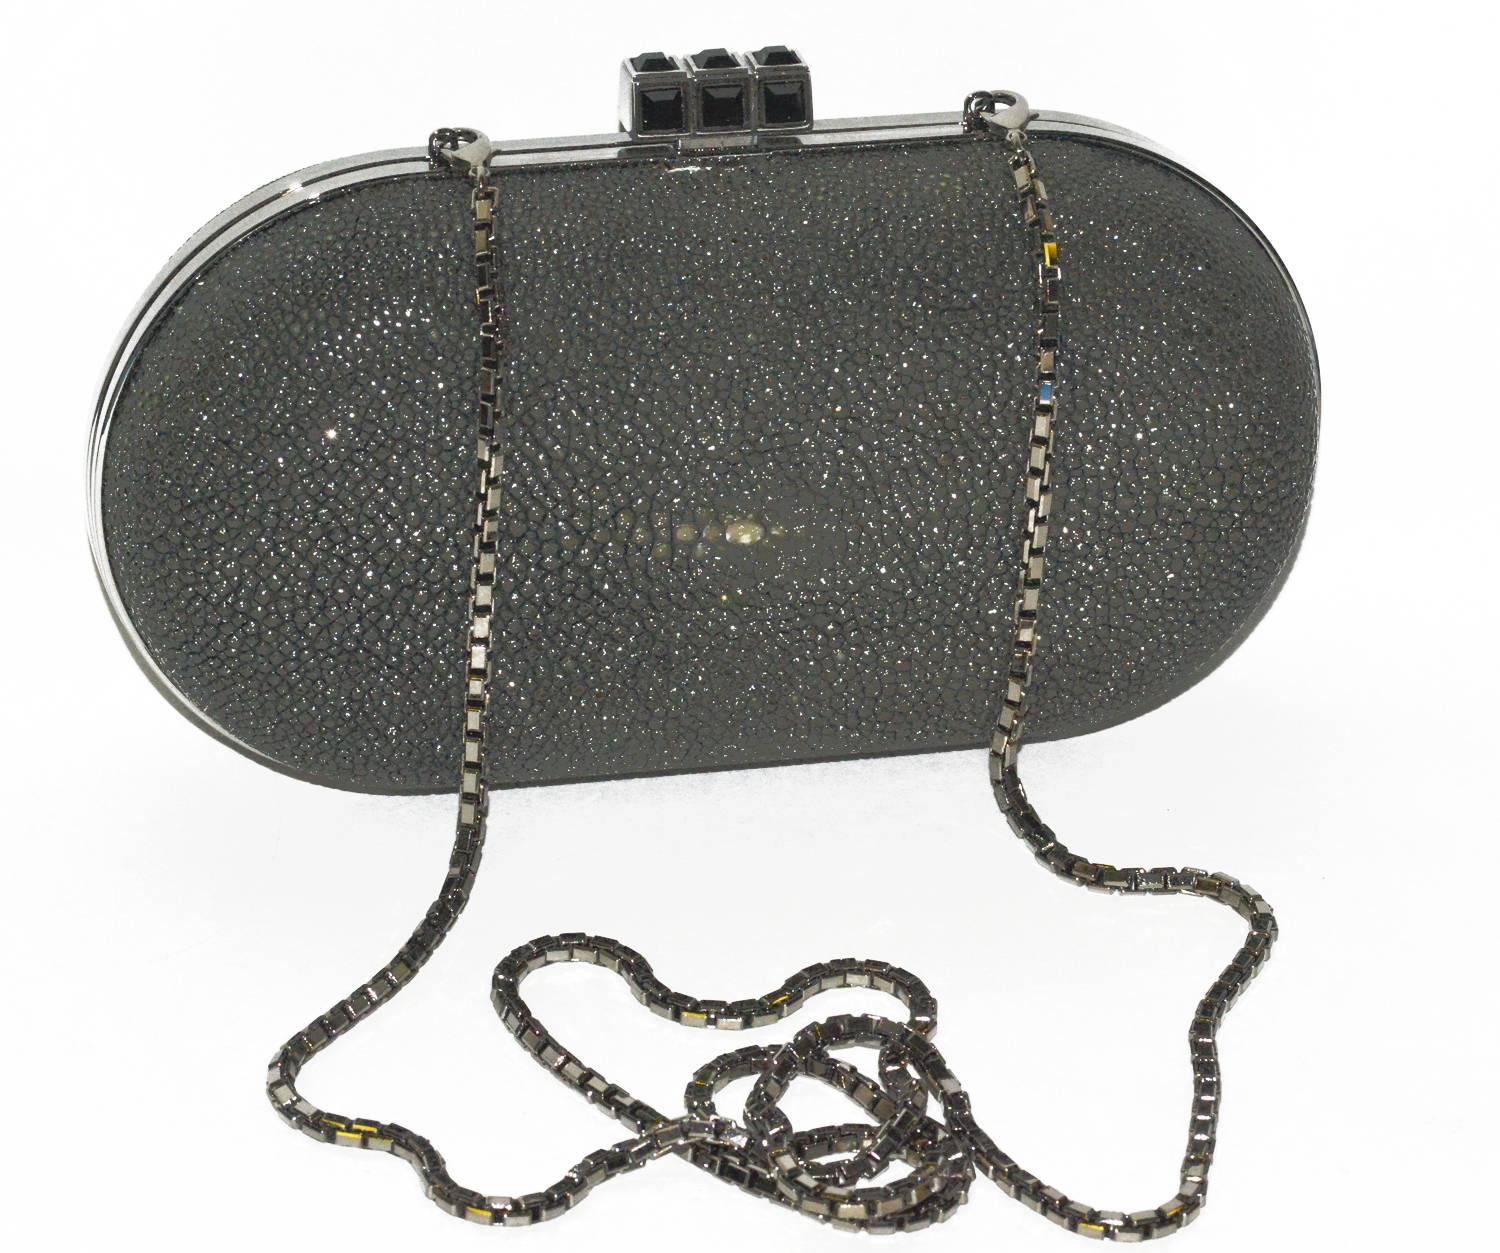 Chic black shagreen Judith Leiber clutch bag with shoulder chain.  Perfect for day or evening, in pristine condition.